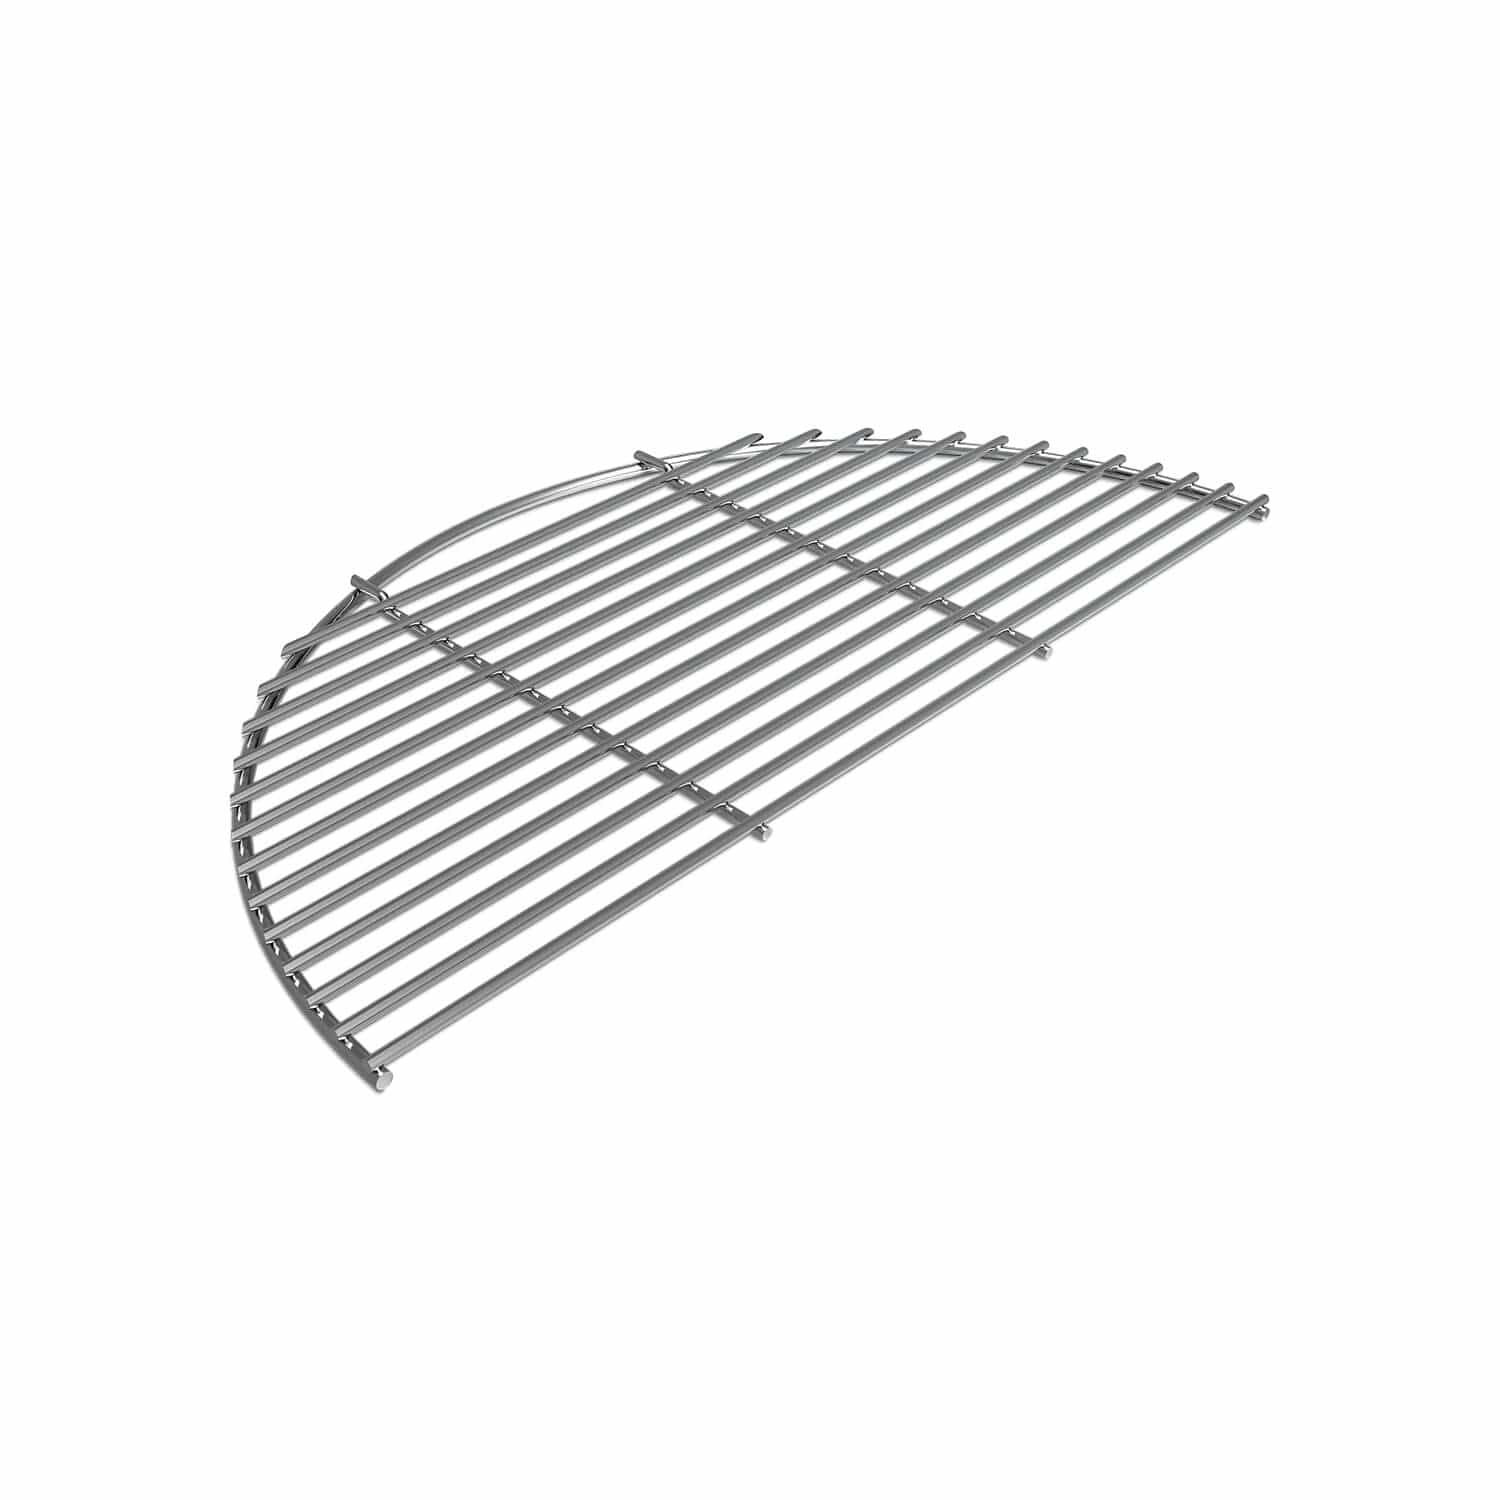 Big Green Egg Barbeque Stainless Steel Half Grid